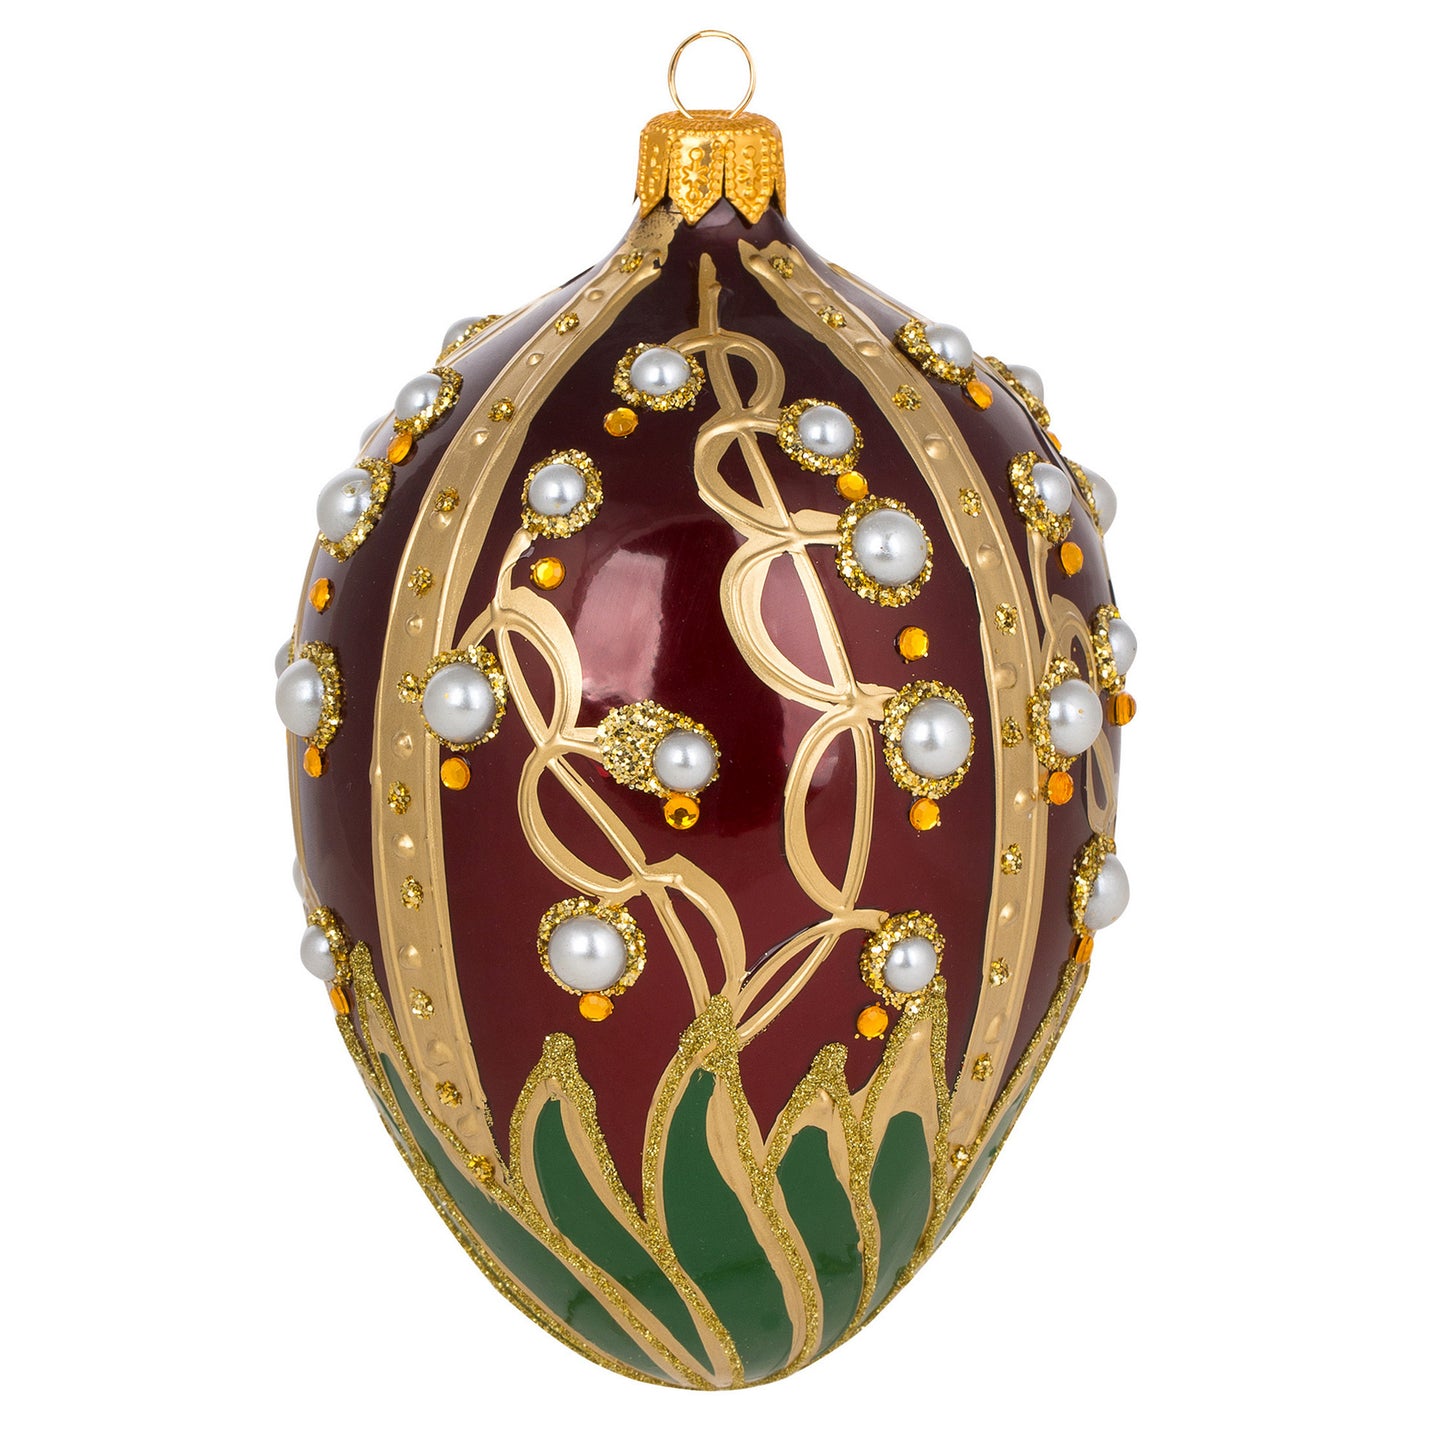 RED FABERGÉ EGG WITH LILY OF THE VALLEY PATTERN